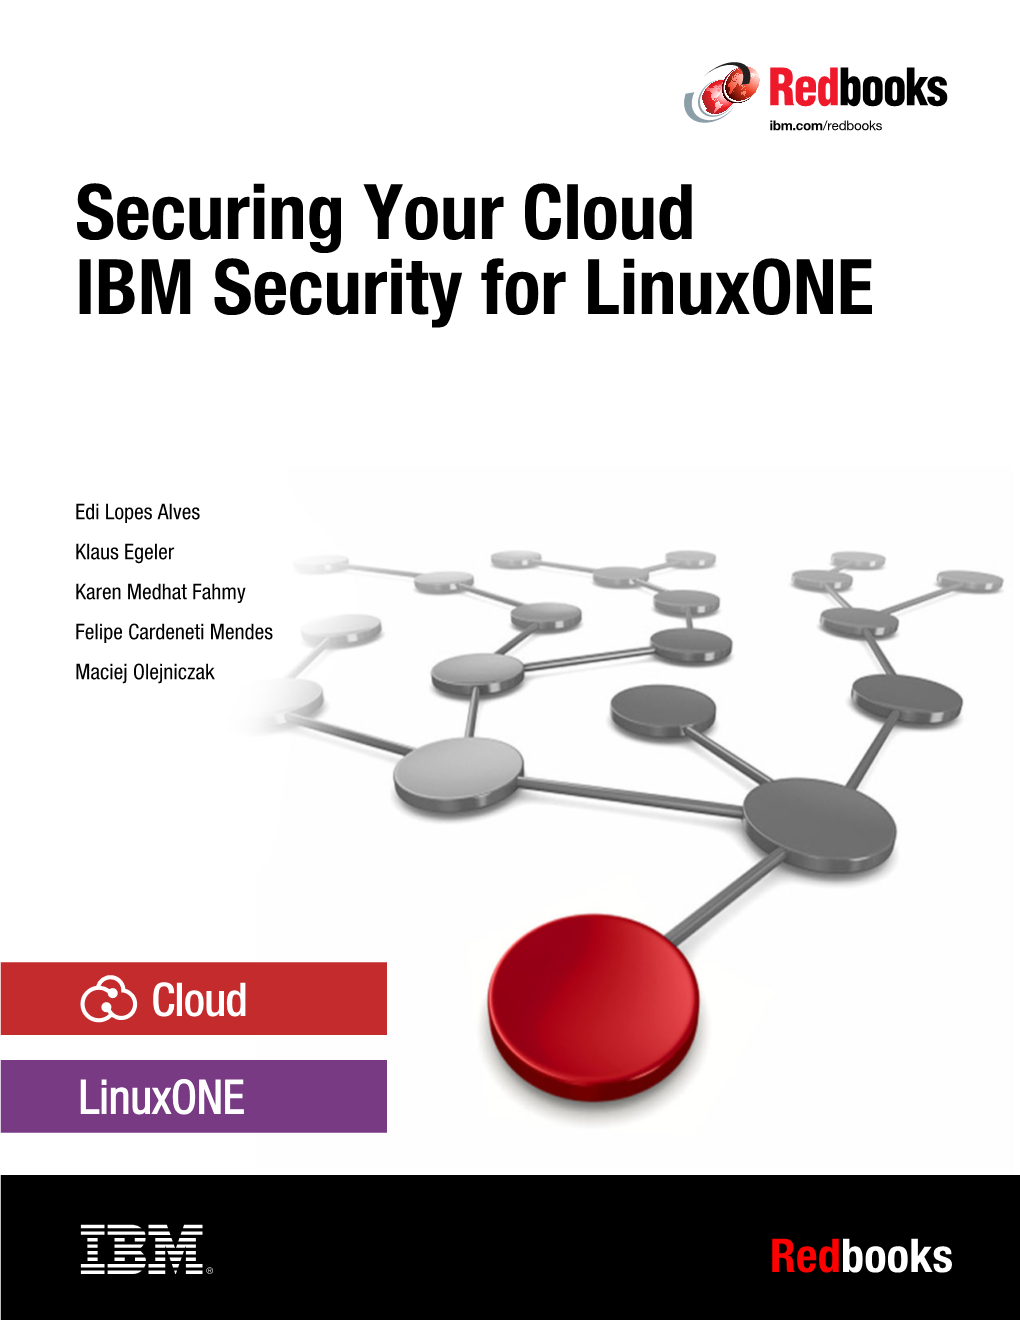 Securing Your Cloud: IBM Security for Linuxone